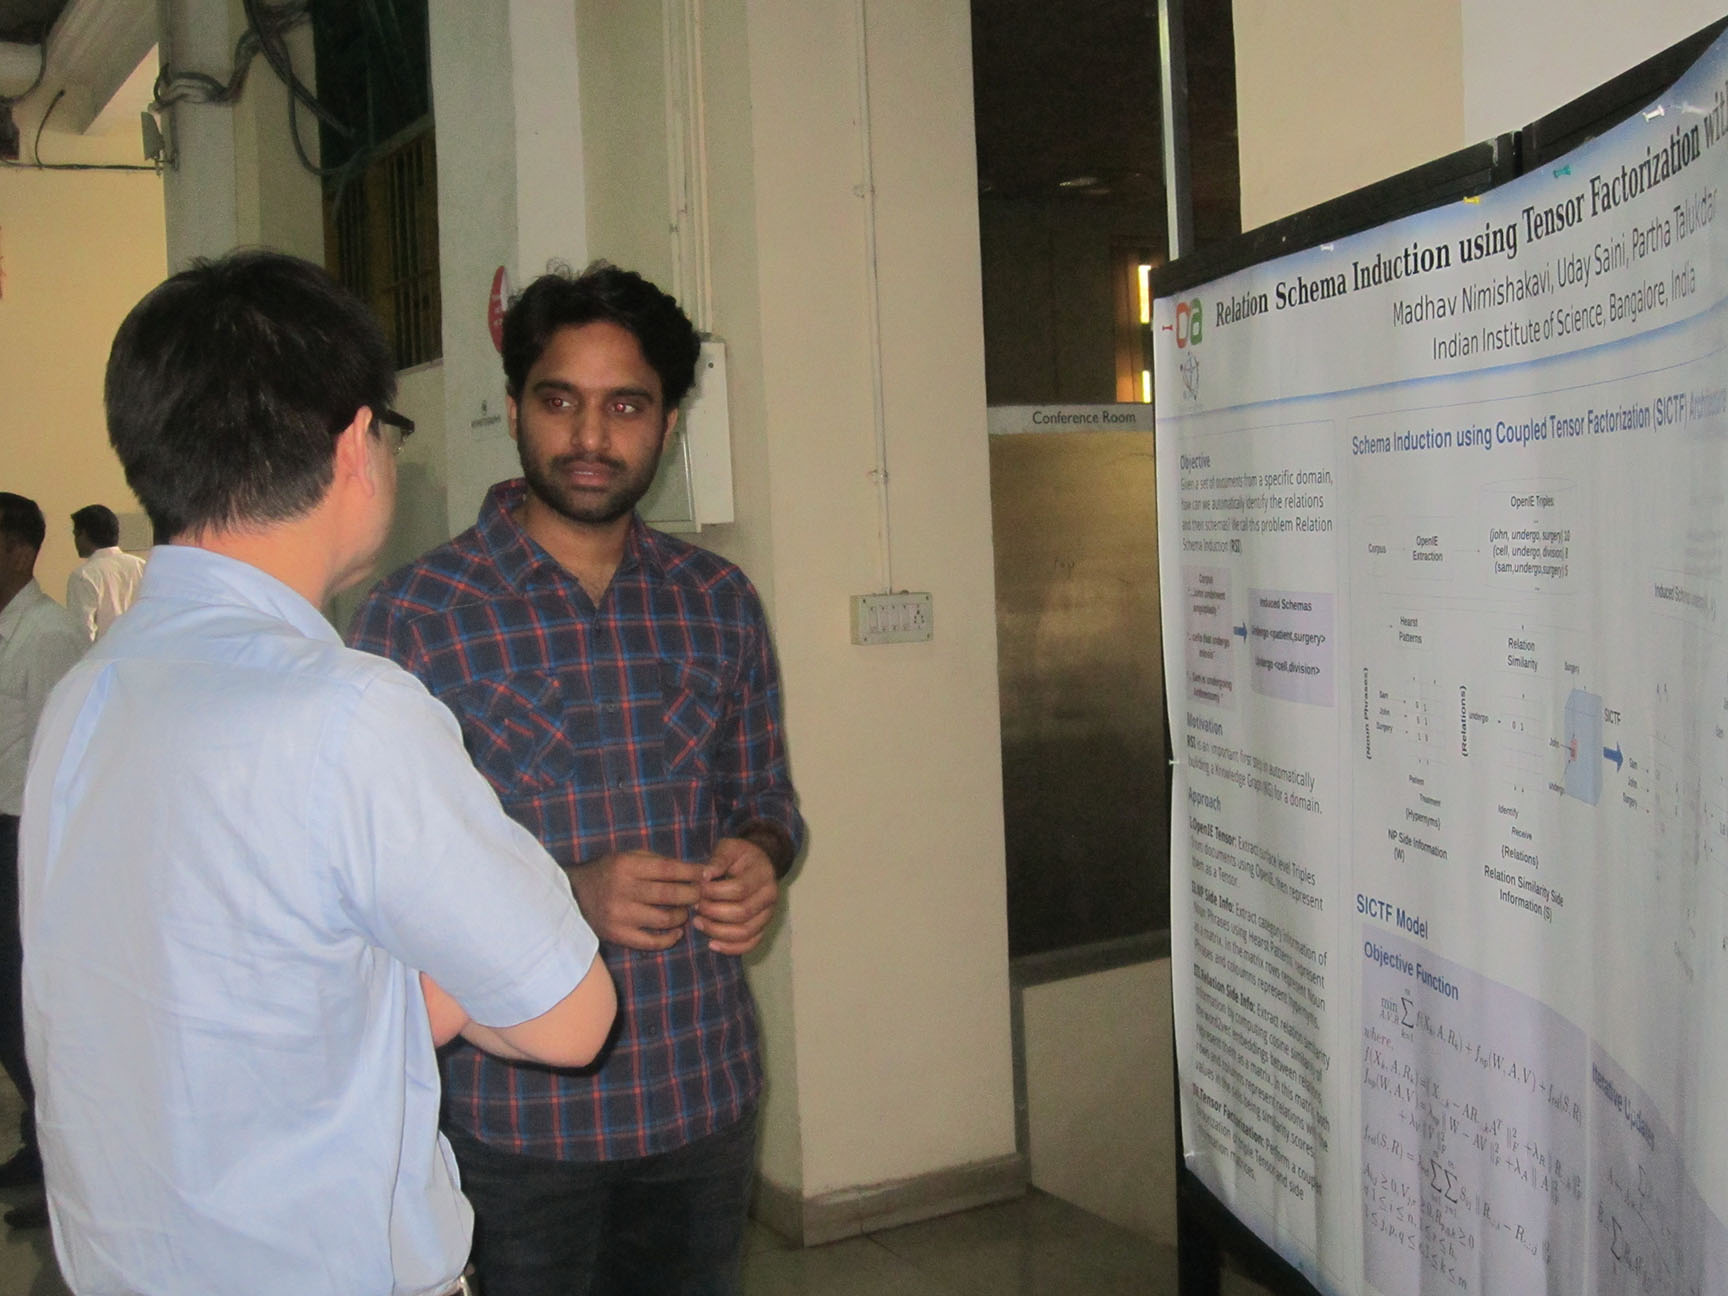 During the poster session